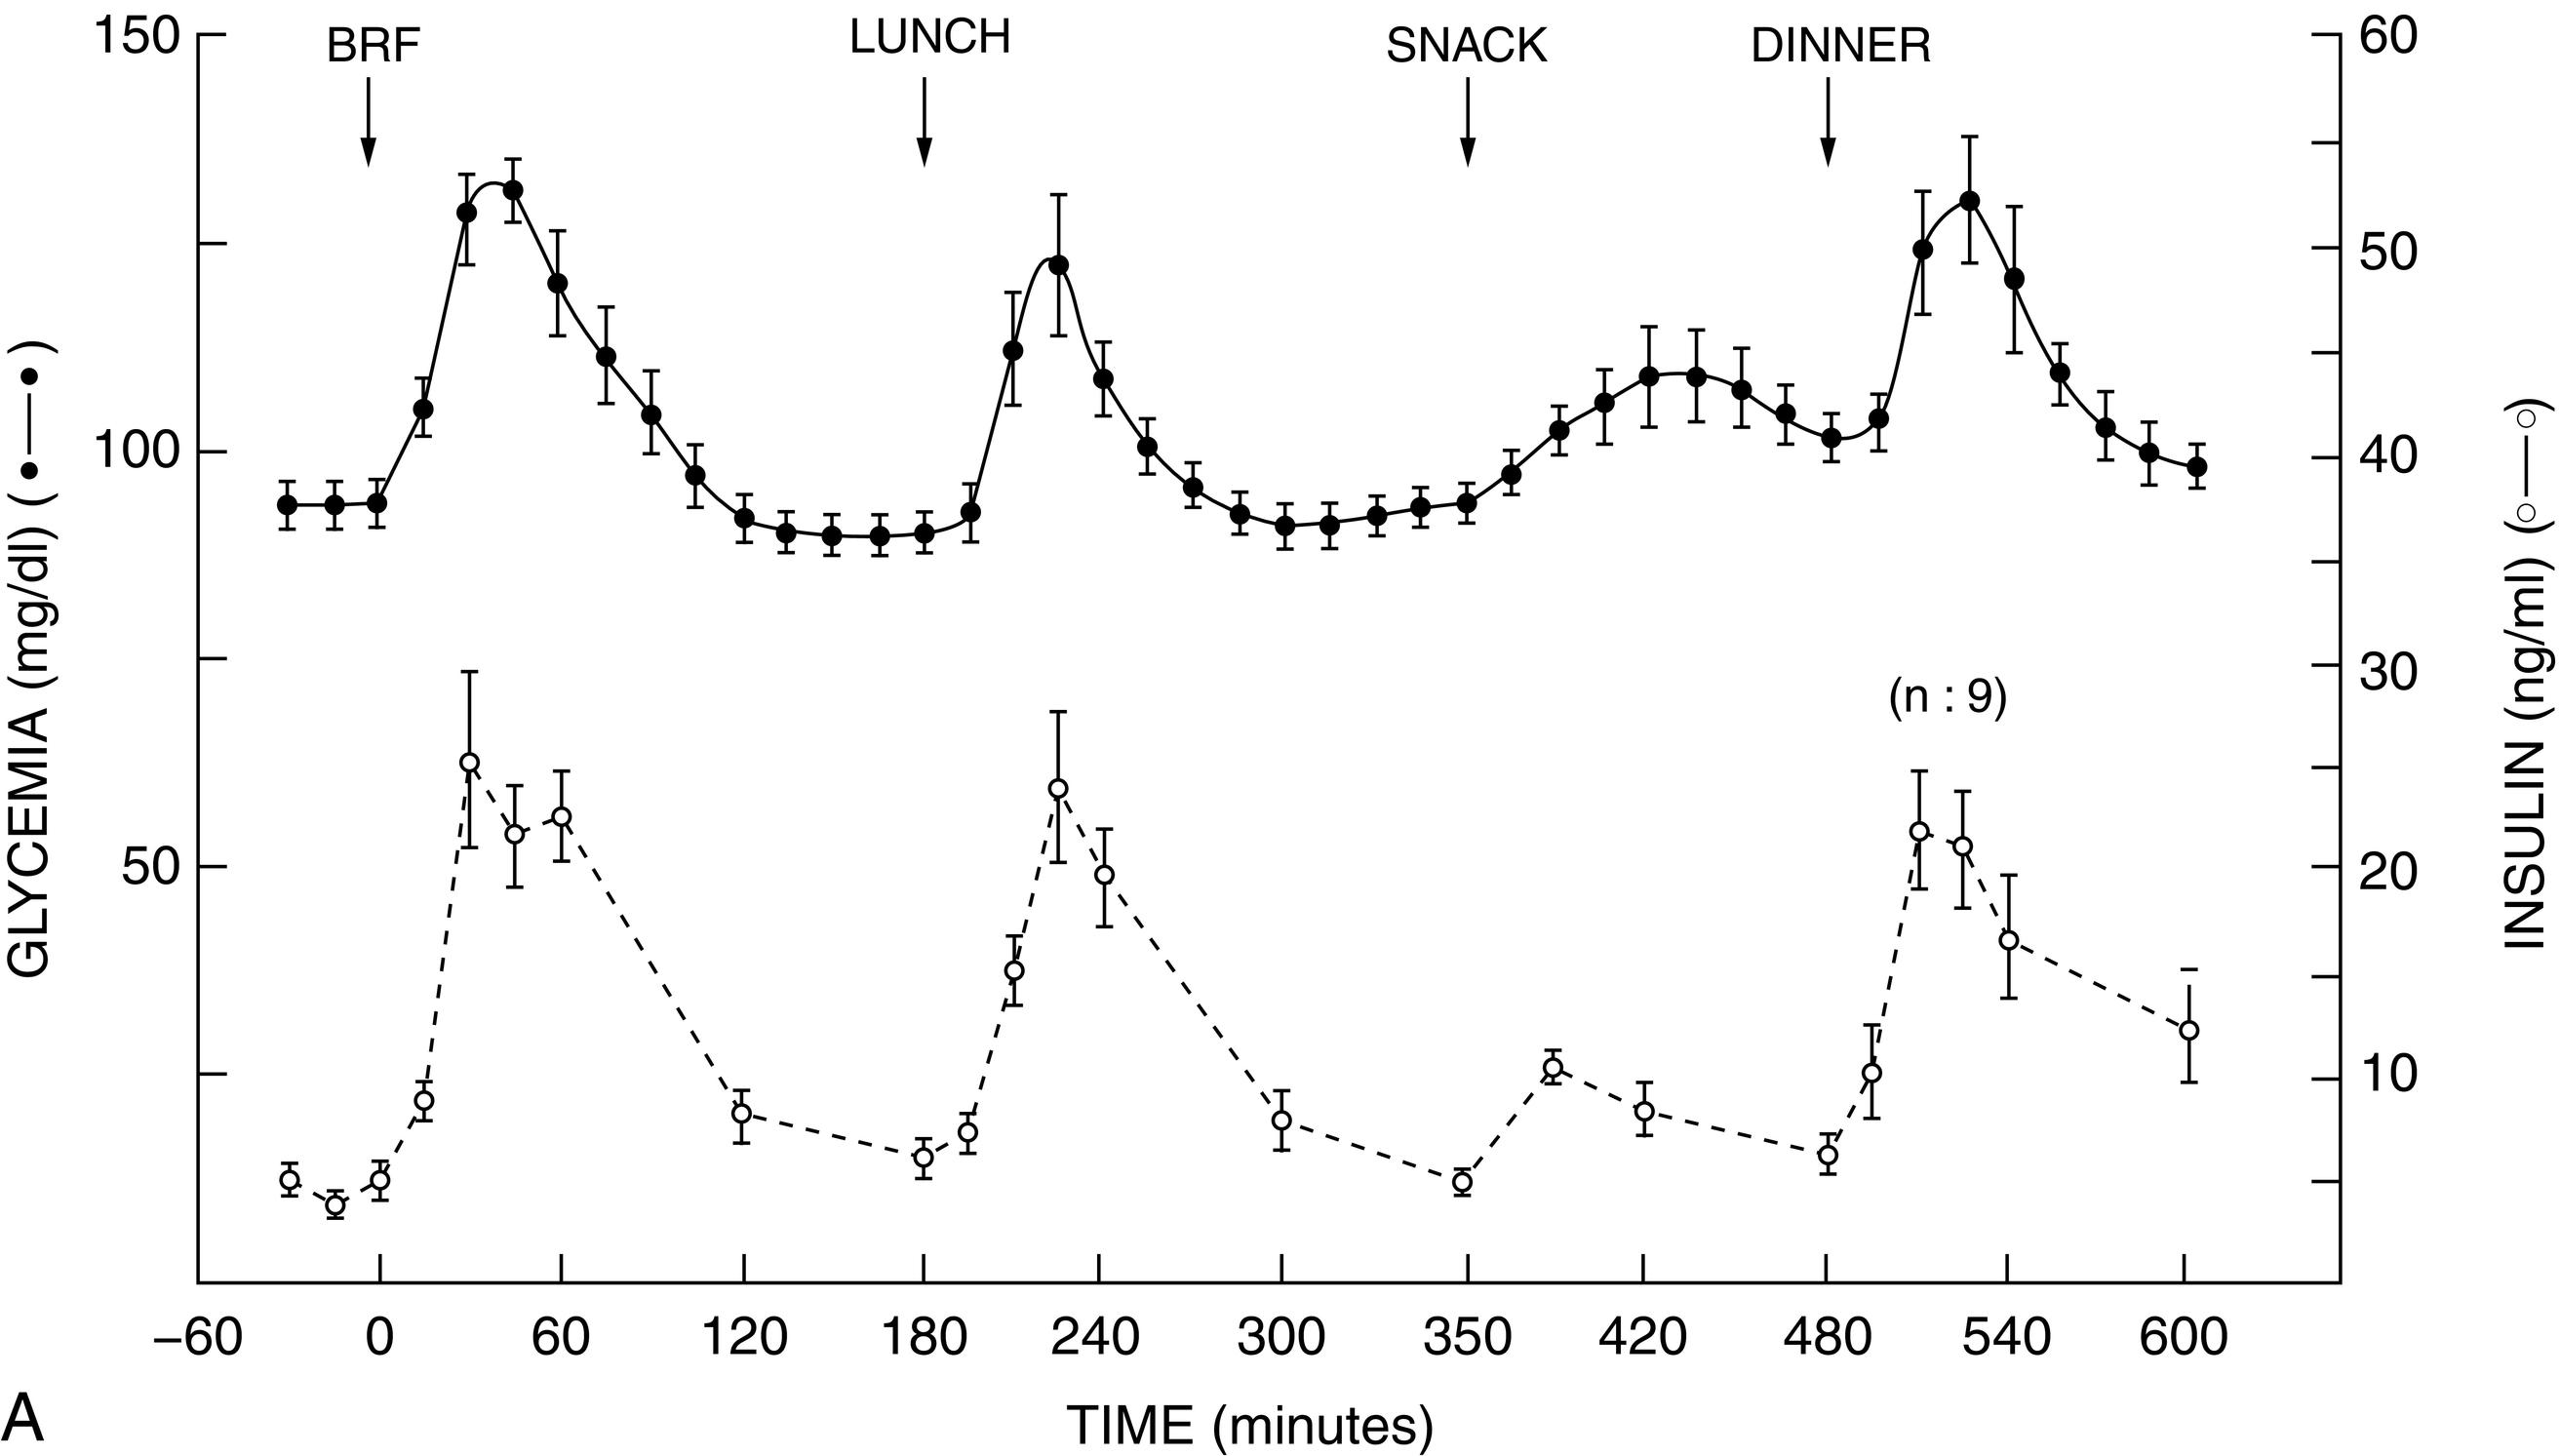 Fig. 21.11, A, Representation of the normal relationships among food intake, blood glucose, and serum insulin concentration. Note that glucose concentration is maintained between 80 and 140 mg/dL. Note also the precise release of insulin that has passed through the portal circulation synchronous with and proportional to the food-induced glycemic excursions. Compare and contrast these patterns with the time pattern of insulin action after subcutaneous injection of aspart/glulisine/lispro, regular, NPH, and glargine/detemir insulins. B, pharmacokinetic profiles of human insulin and its analogs. The pharmacokinetic profiles of several currently used insulin preparations are schematically presented. The fast insulin aspart ( FiASP ) and long-acting analog (Degludec) have been manually inserted consistent with currently available data. These figures are illustrative of and correspond with the time frames in Table 21.11 .